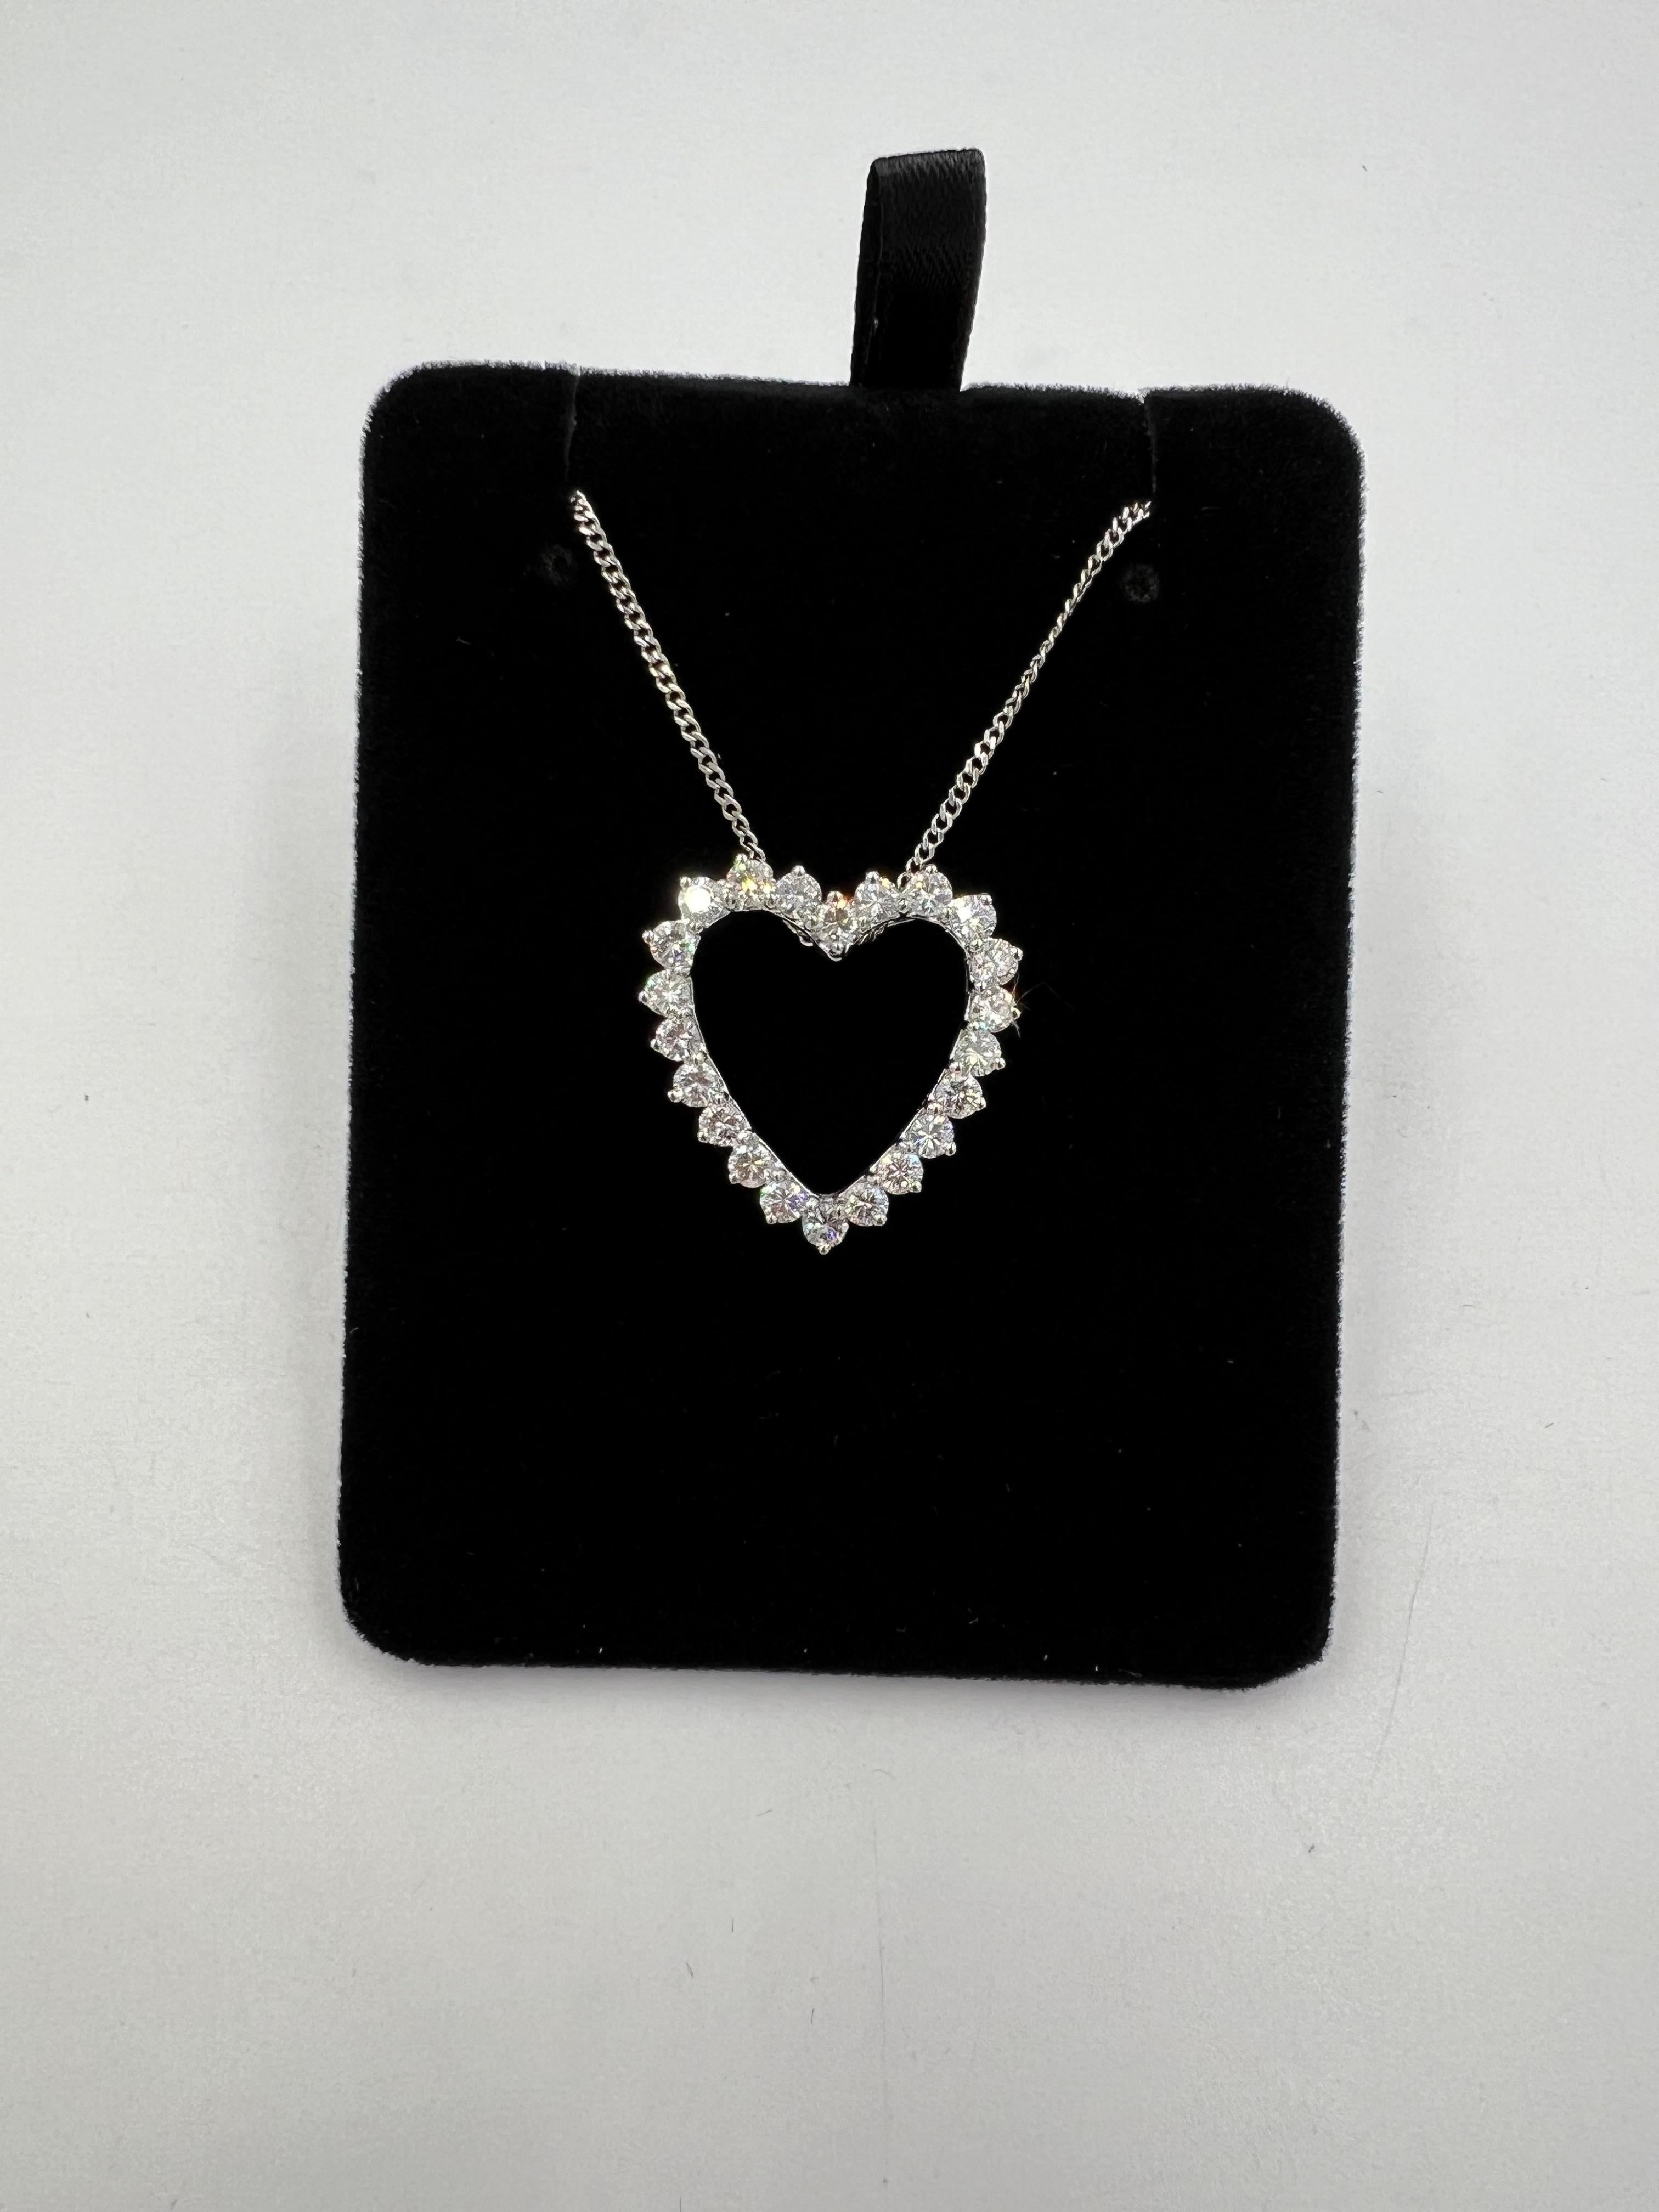 1970s diamond open heart white gold pendant necklace.

The 1970s Diamond Open Heart White Gold Pendant Necklace is a timeless piece of jewelry that captures the essence of elegance and sophistication. Crafted with exquisite detail and precision,